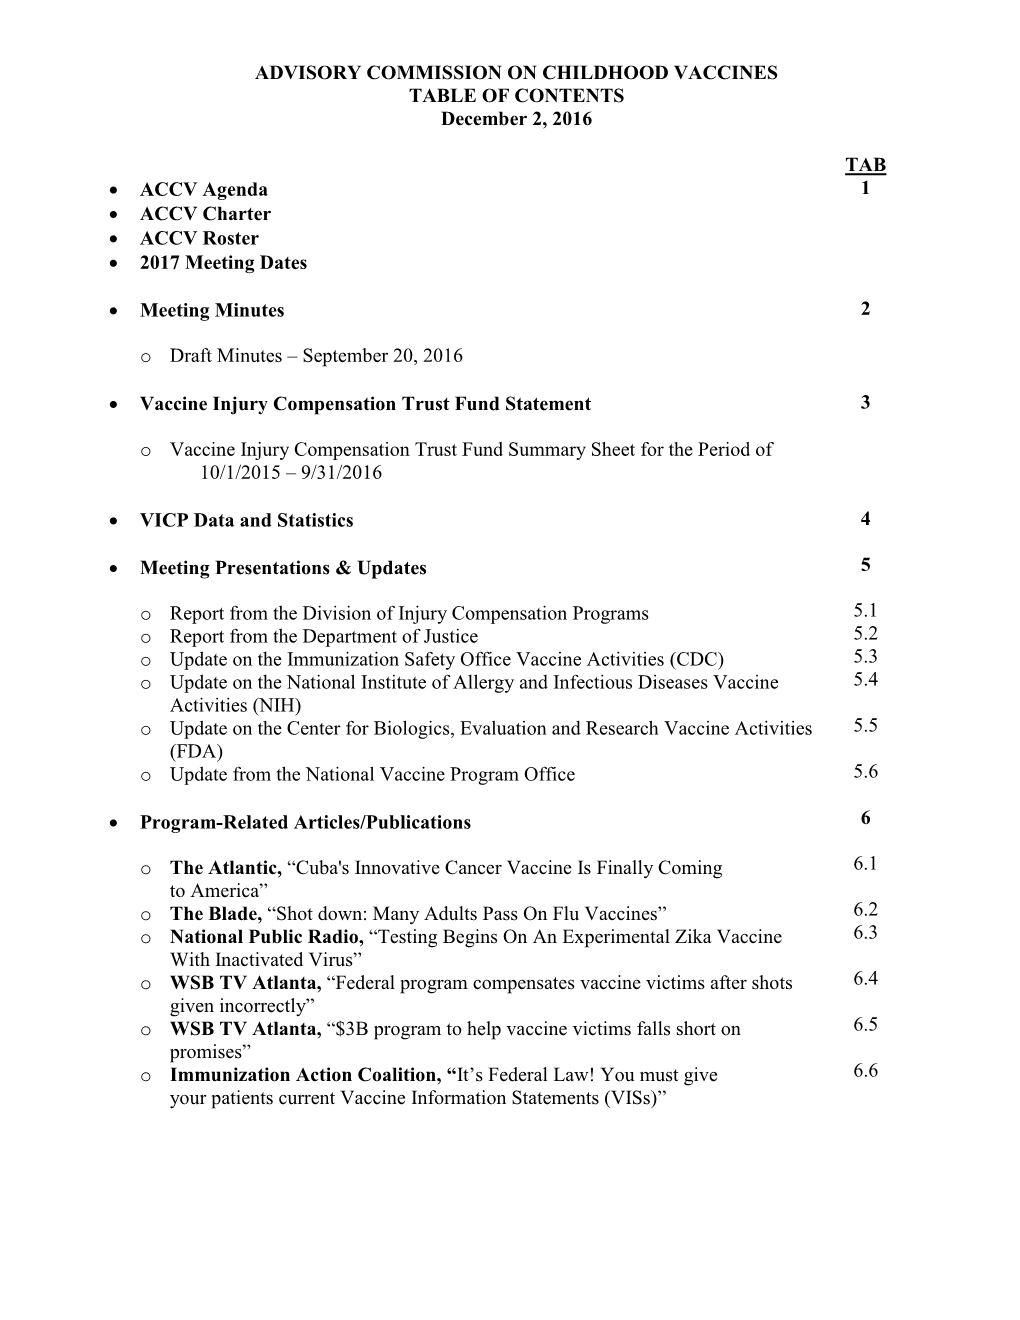 ADVISORY COMMISSION on CHILDHOOD VACCINES TABLE of CONTENTS December 2, 2016